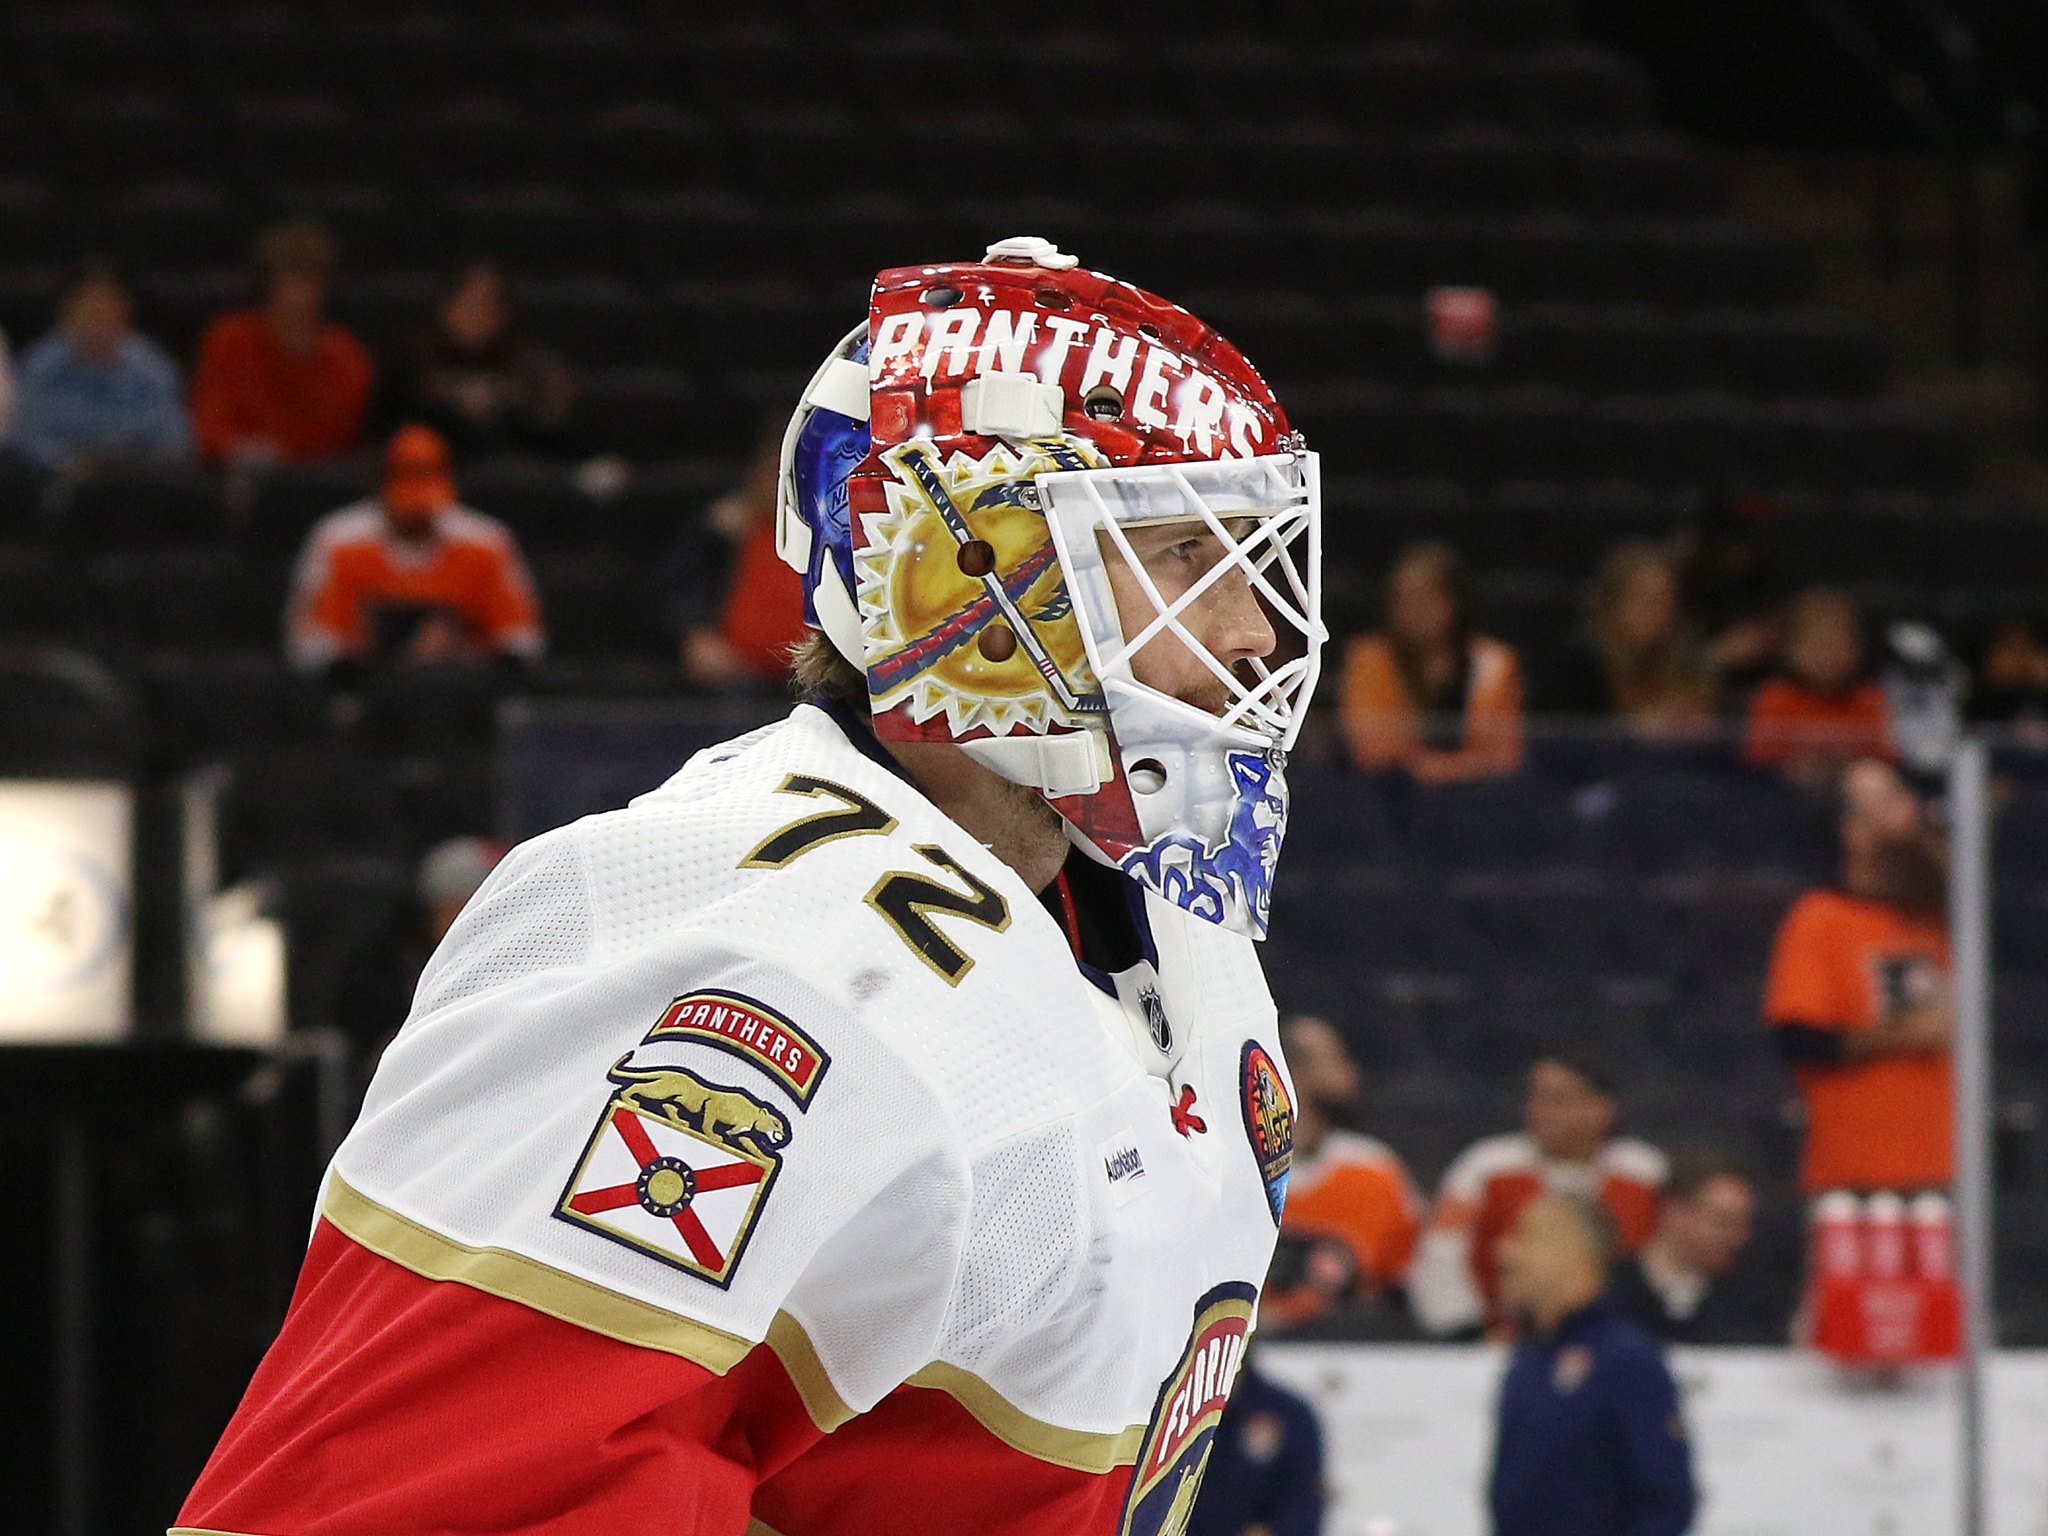 Florida Panthers: My Ten Favorite Moments of 15-16